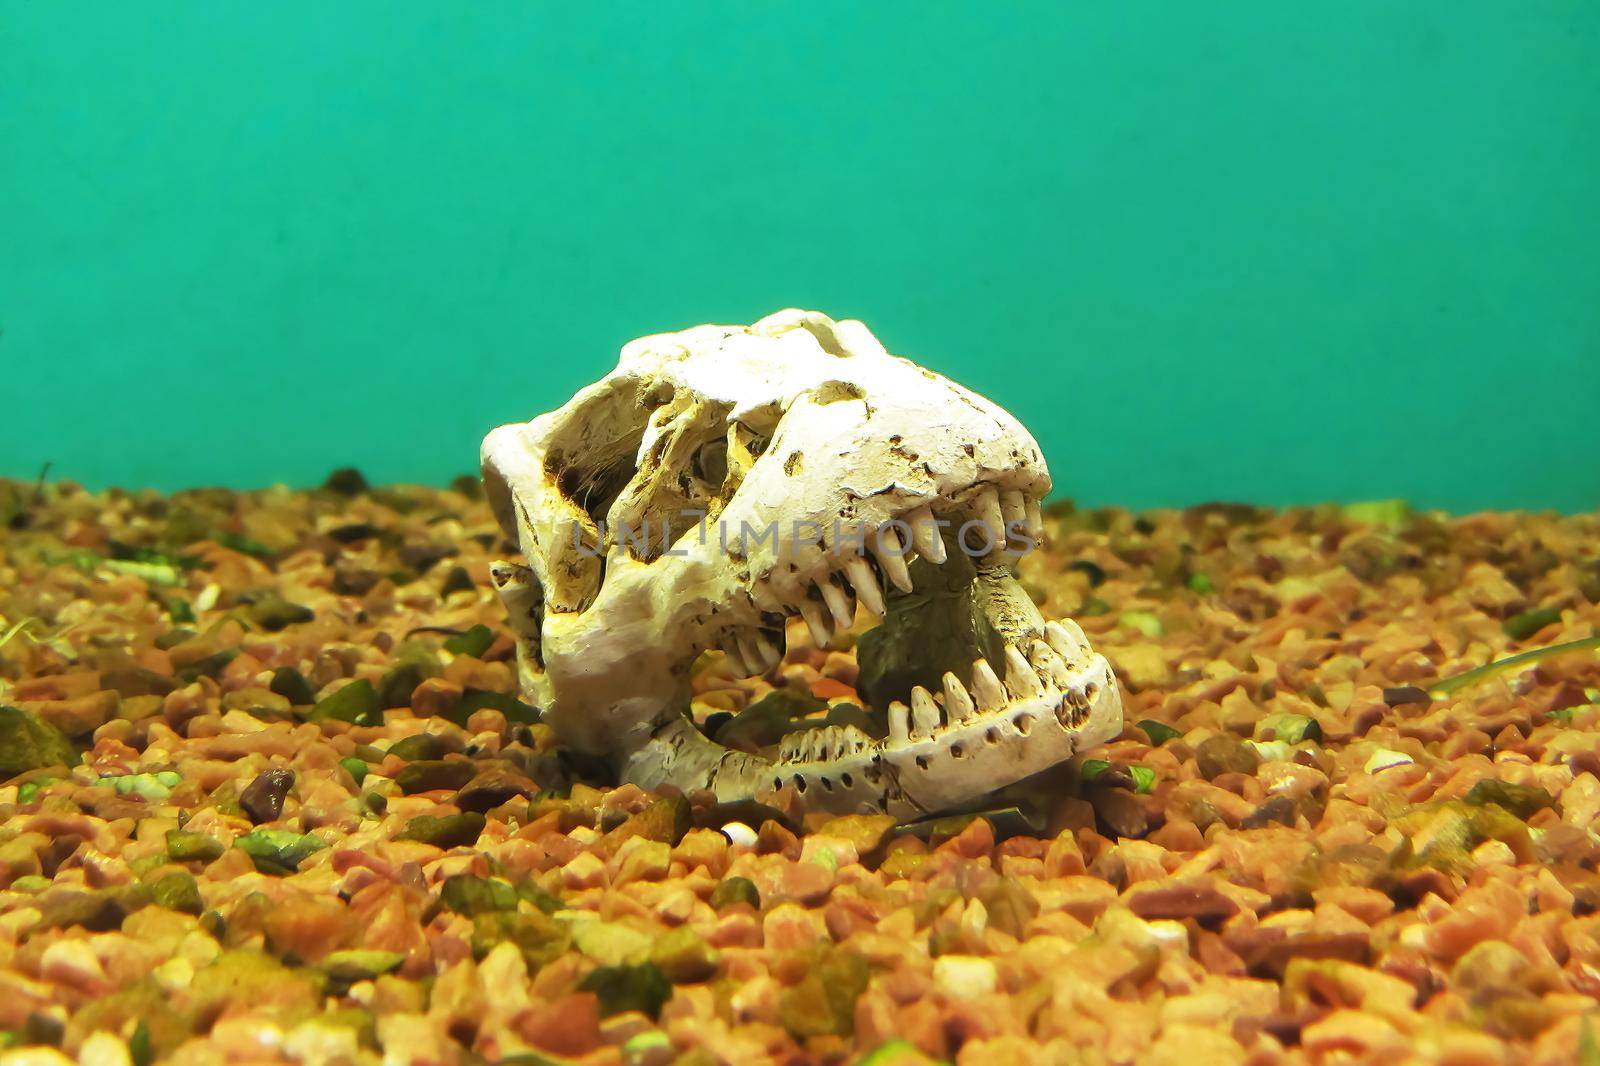 Dinosaur skull in aquarium. With rocks, coral and timber background for hallowoeen skeleton on image